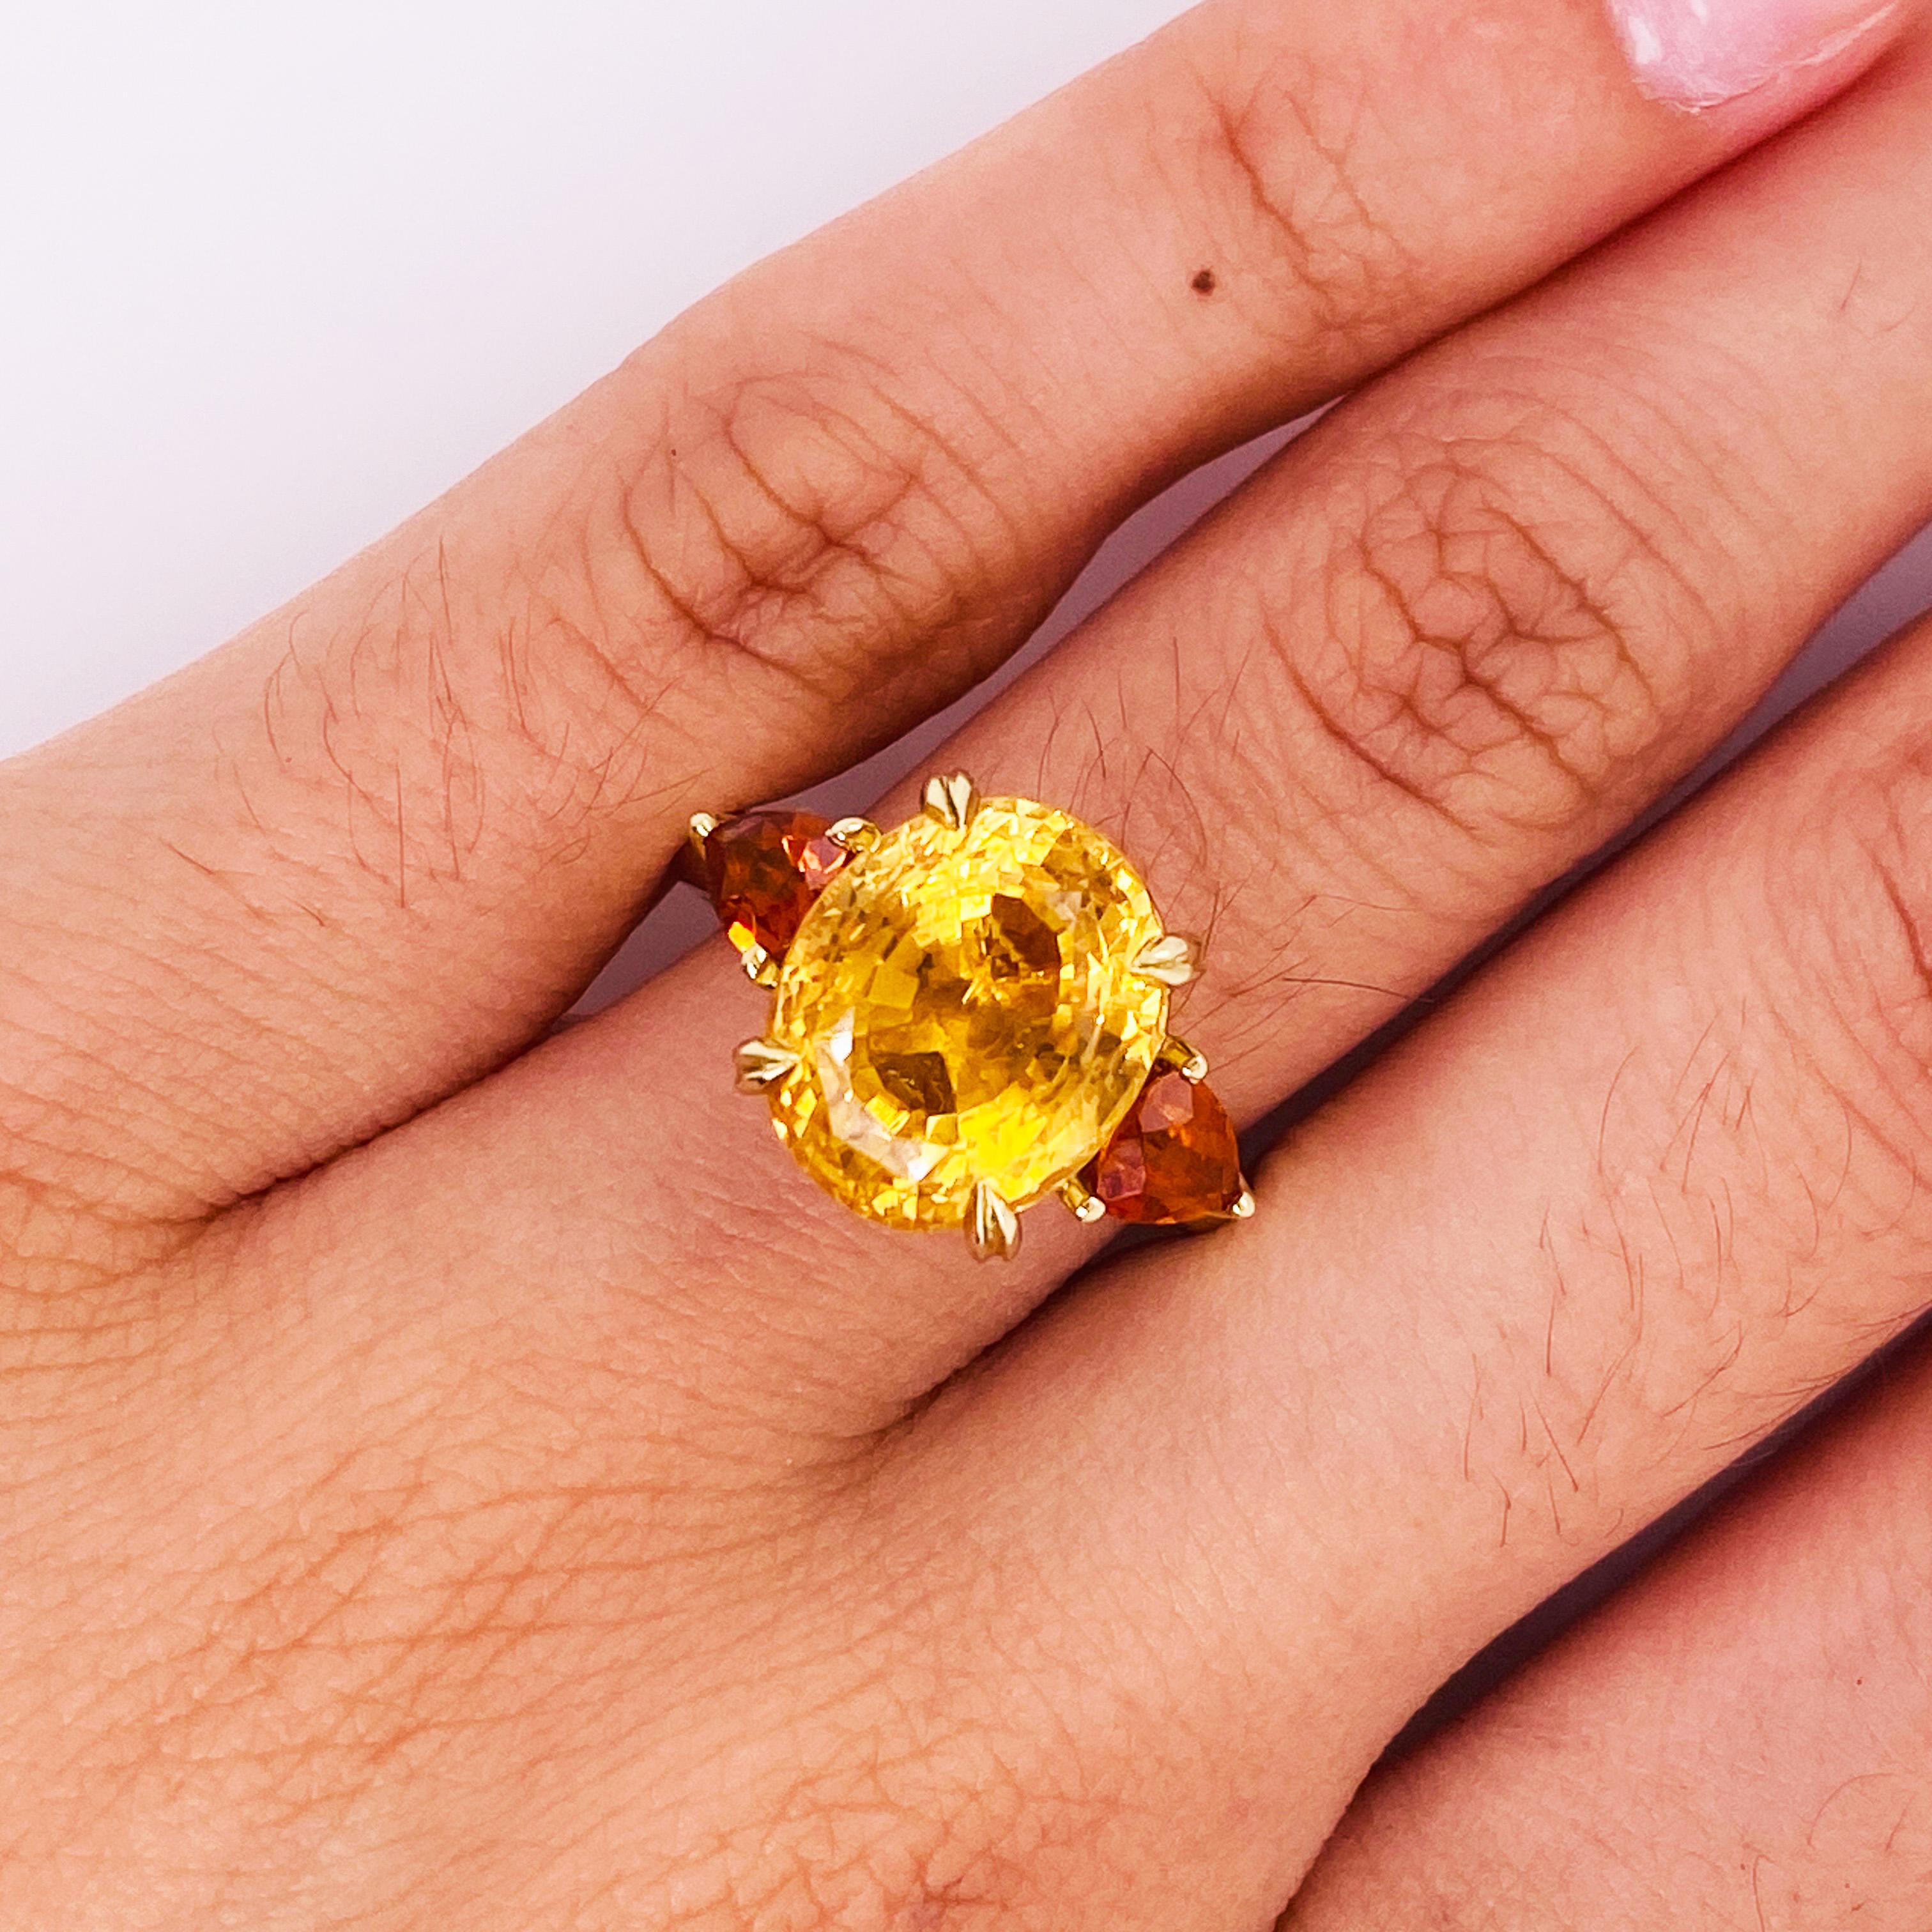 Adorn a magnificent finger with this gorgeous citrine three-stone ring! Celebrate a loved one with oranges that speak of tropical sunsets, honey, and the warm glow of an evening by a fire. The large oval golden honey orange citrine is beautifully